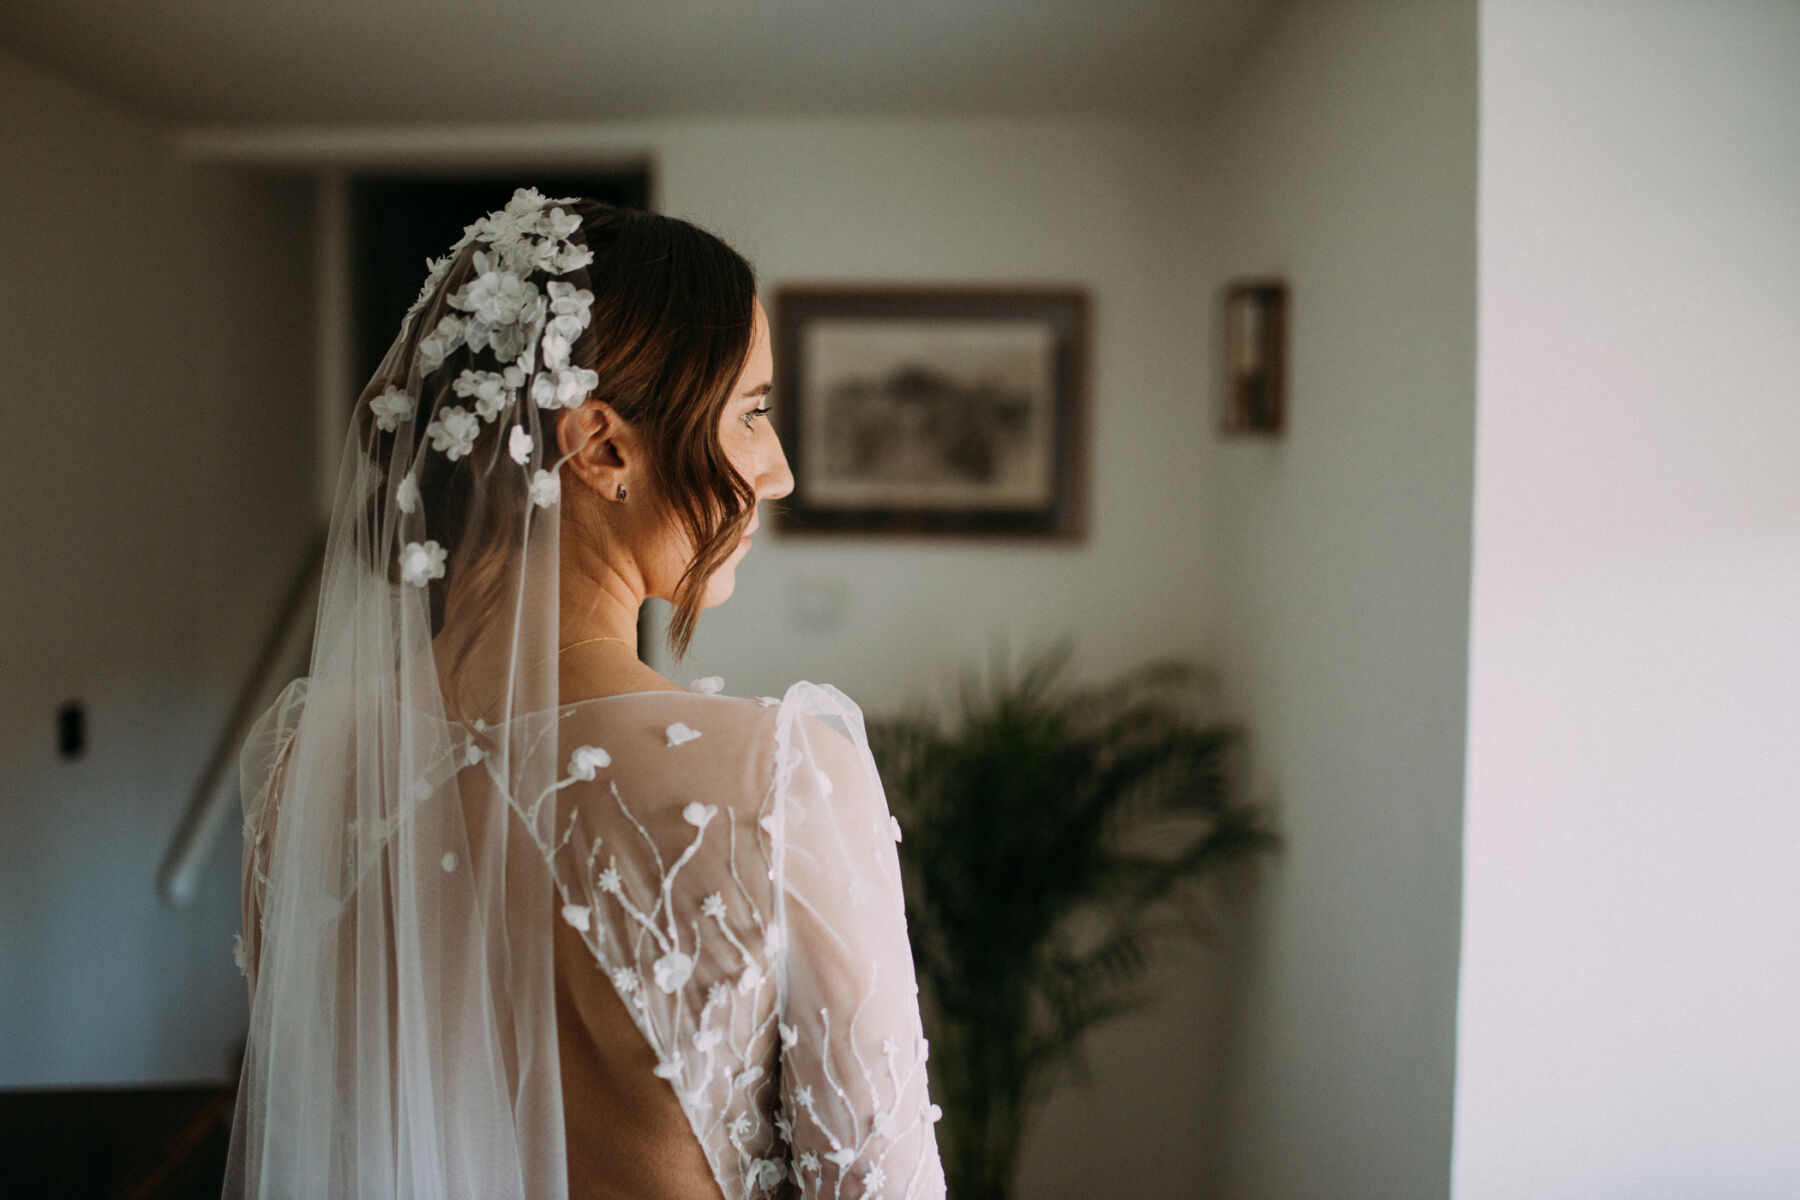 Bride wearing the Lara dress & Lunaria Veil by Rime Arodaky, from The Mews Bridal boutique.